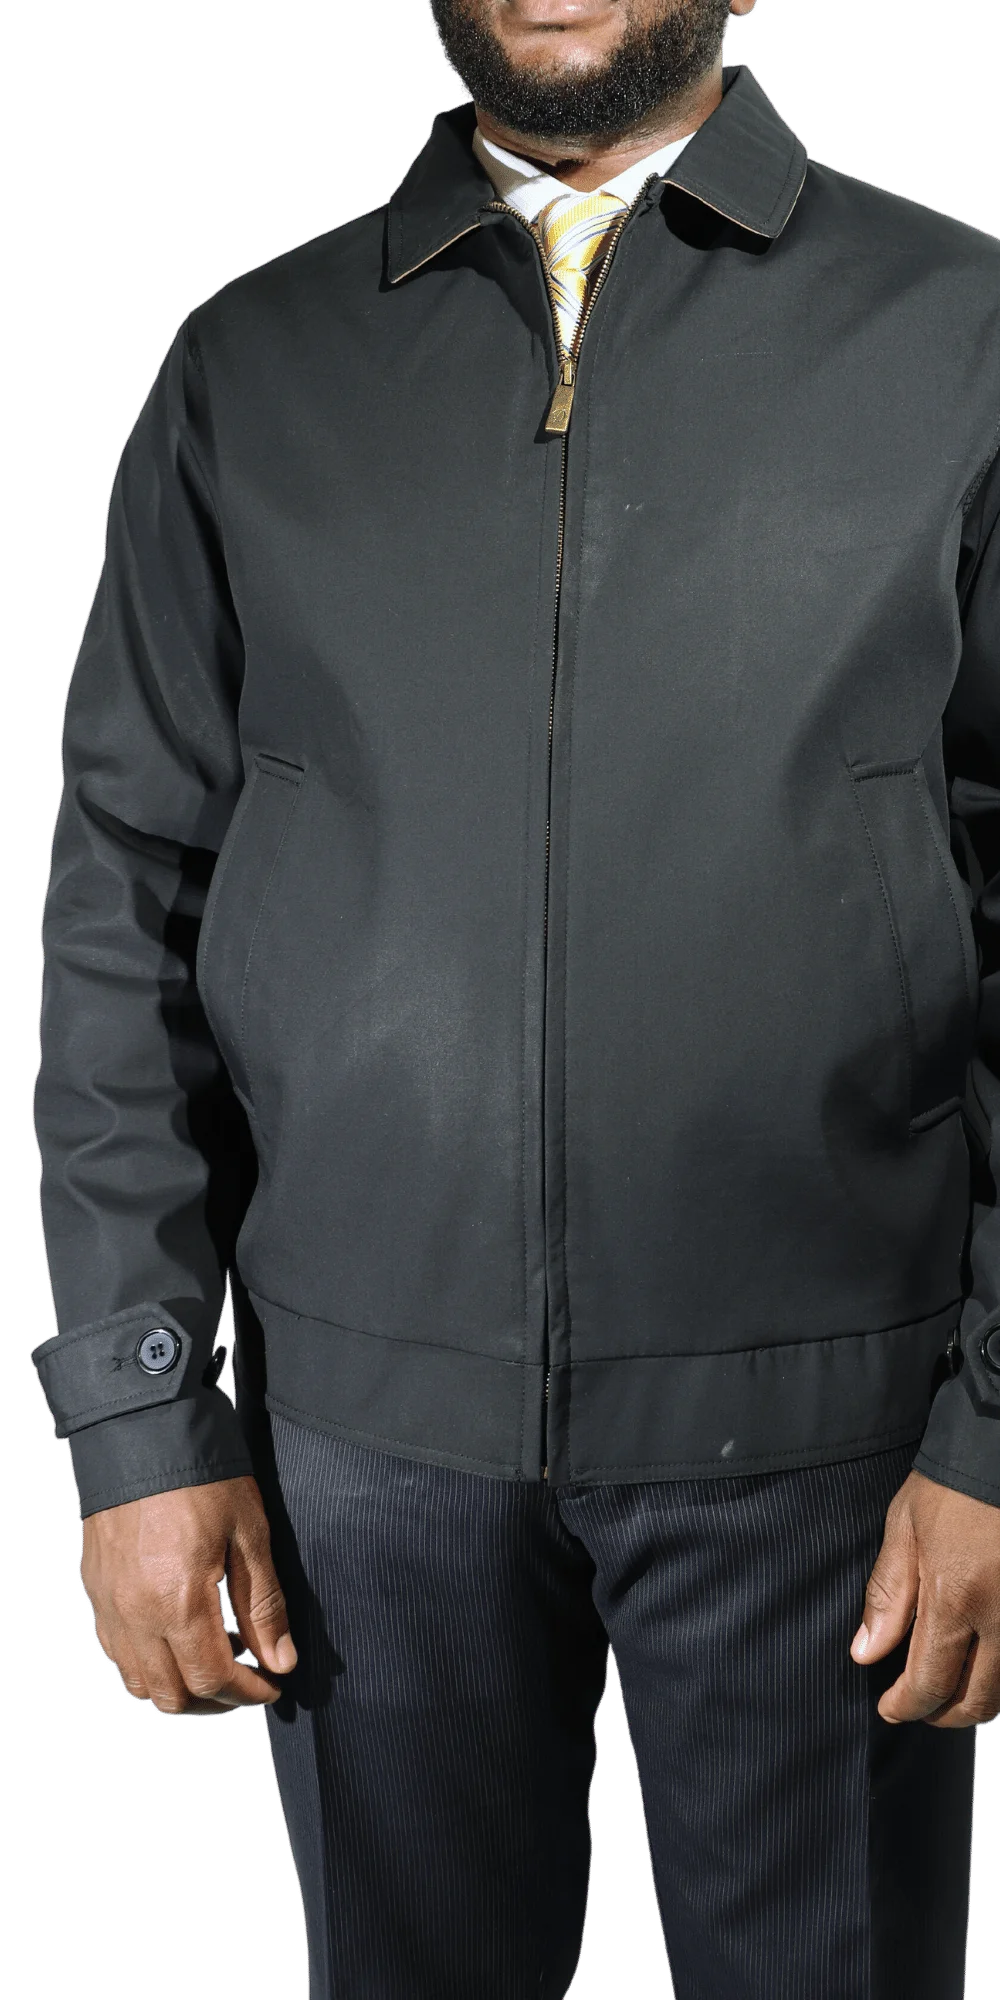 Men's Durburg Simon Zip-up Jacket in Black is available in-store, 337 Monty Naicker Street, Durban CBD or online at Omar's Tailors & Outfitters online store.   A men's fashion curation for South African men - established in 1911.